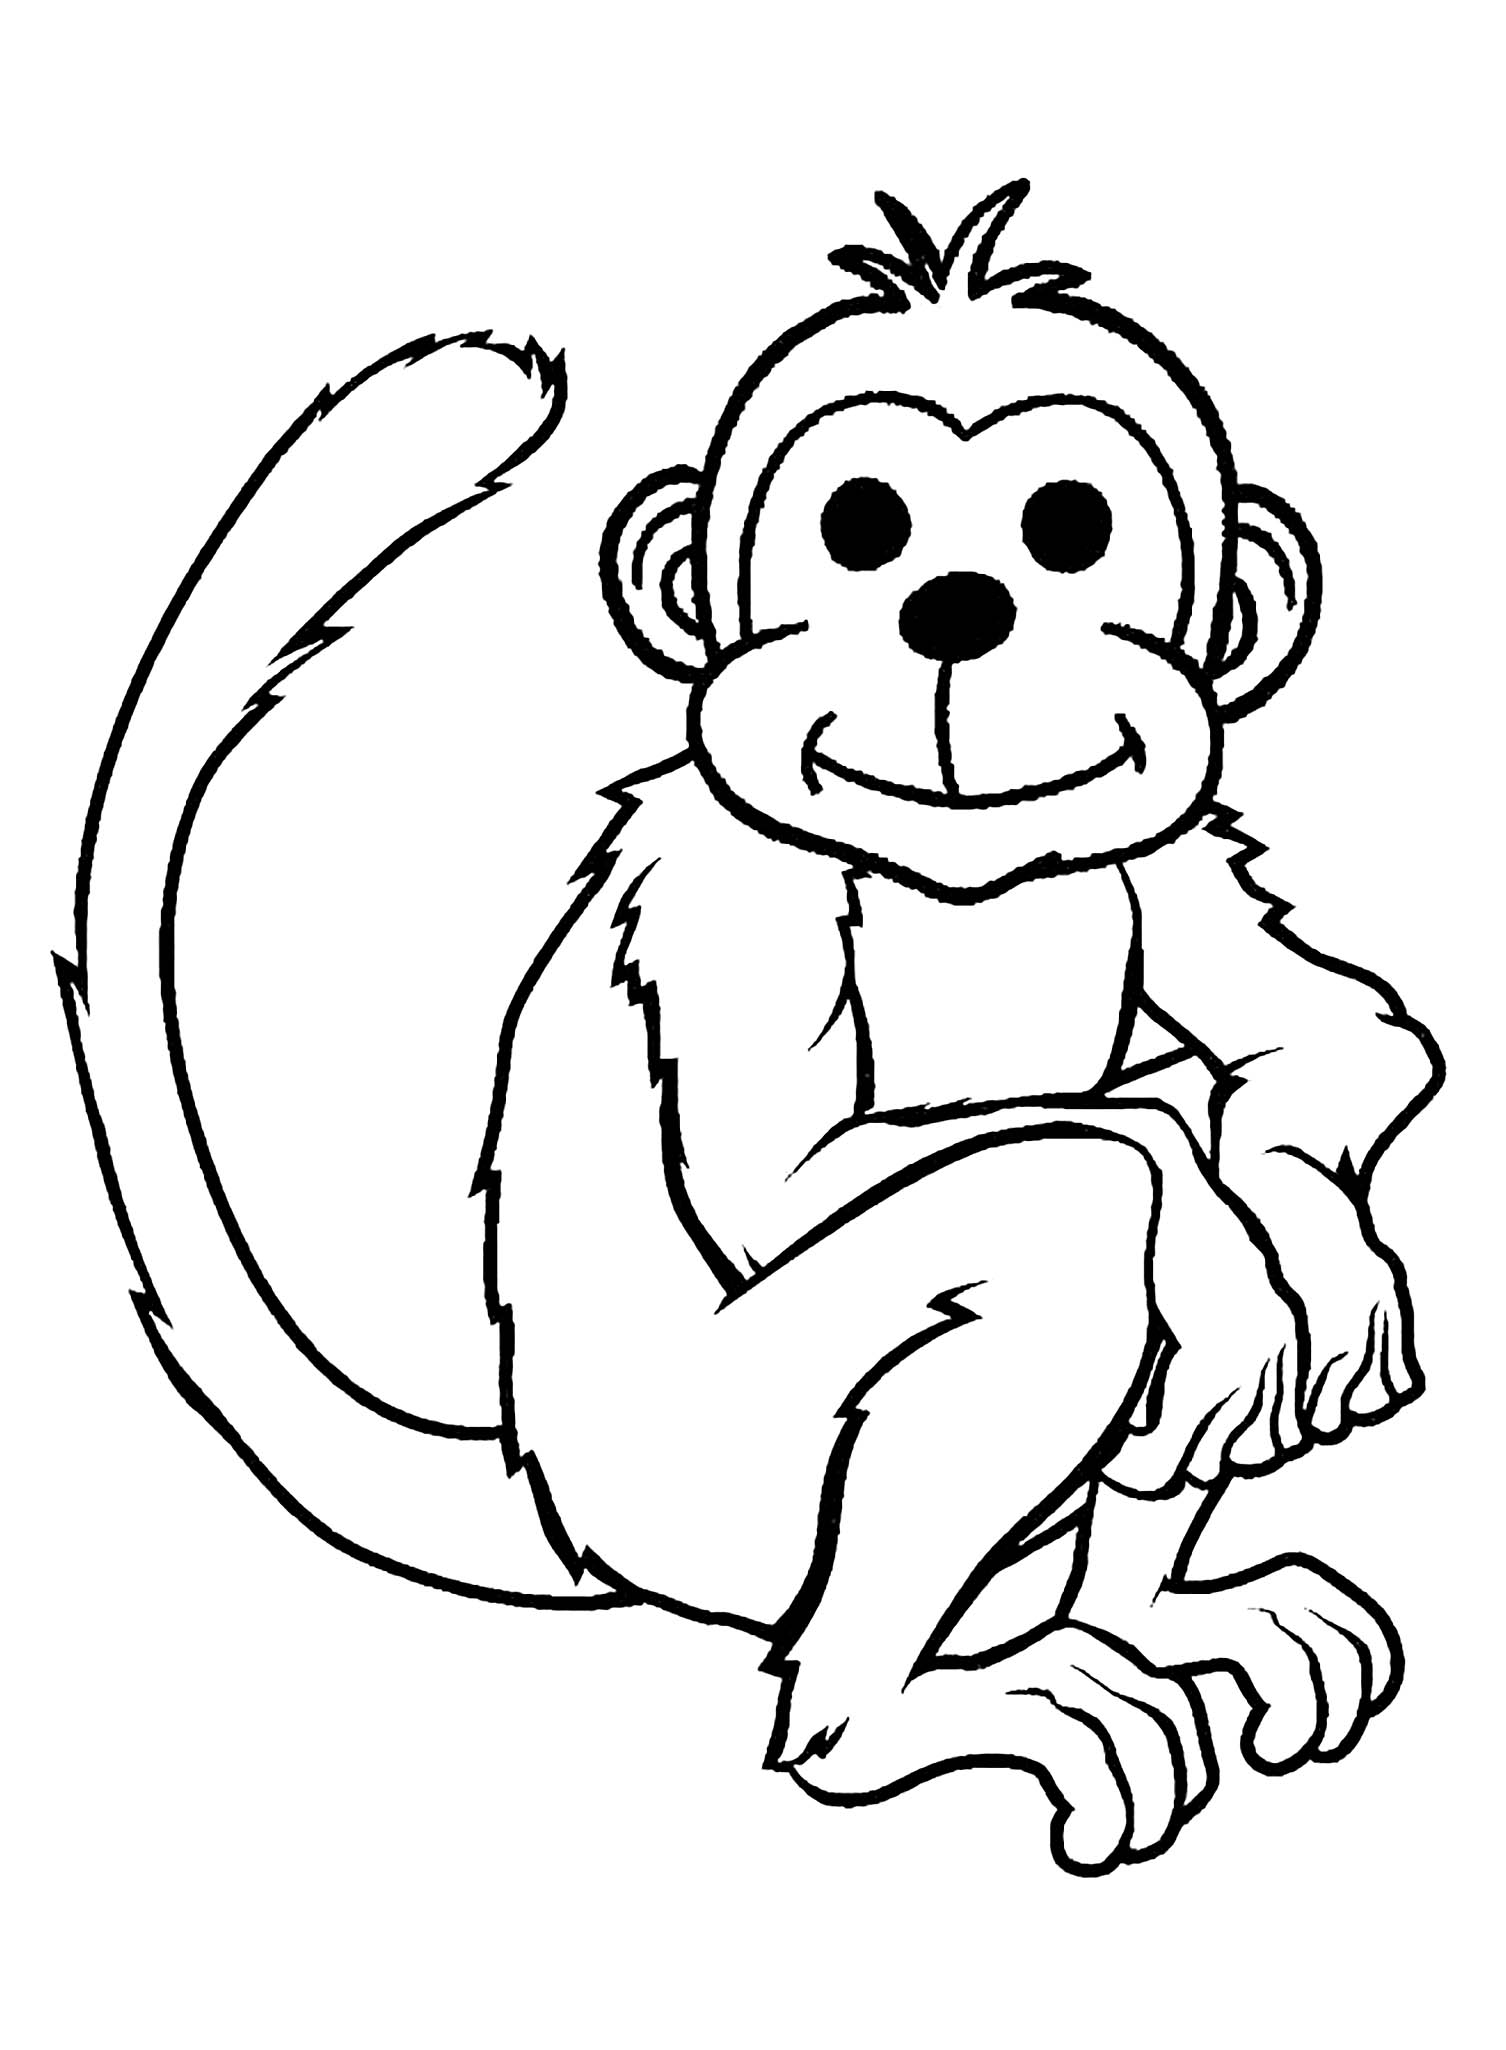 printable-coloring-pages-monkey